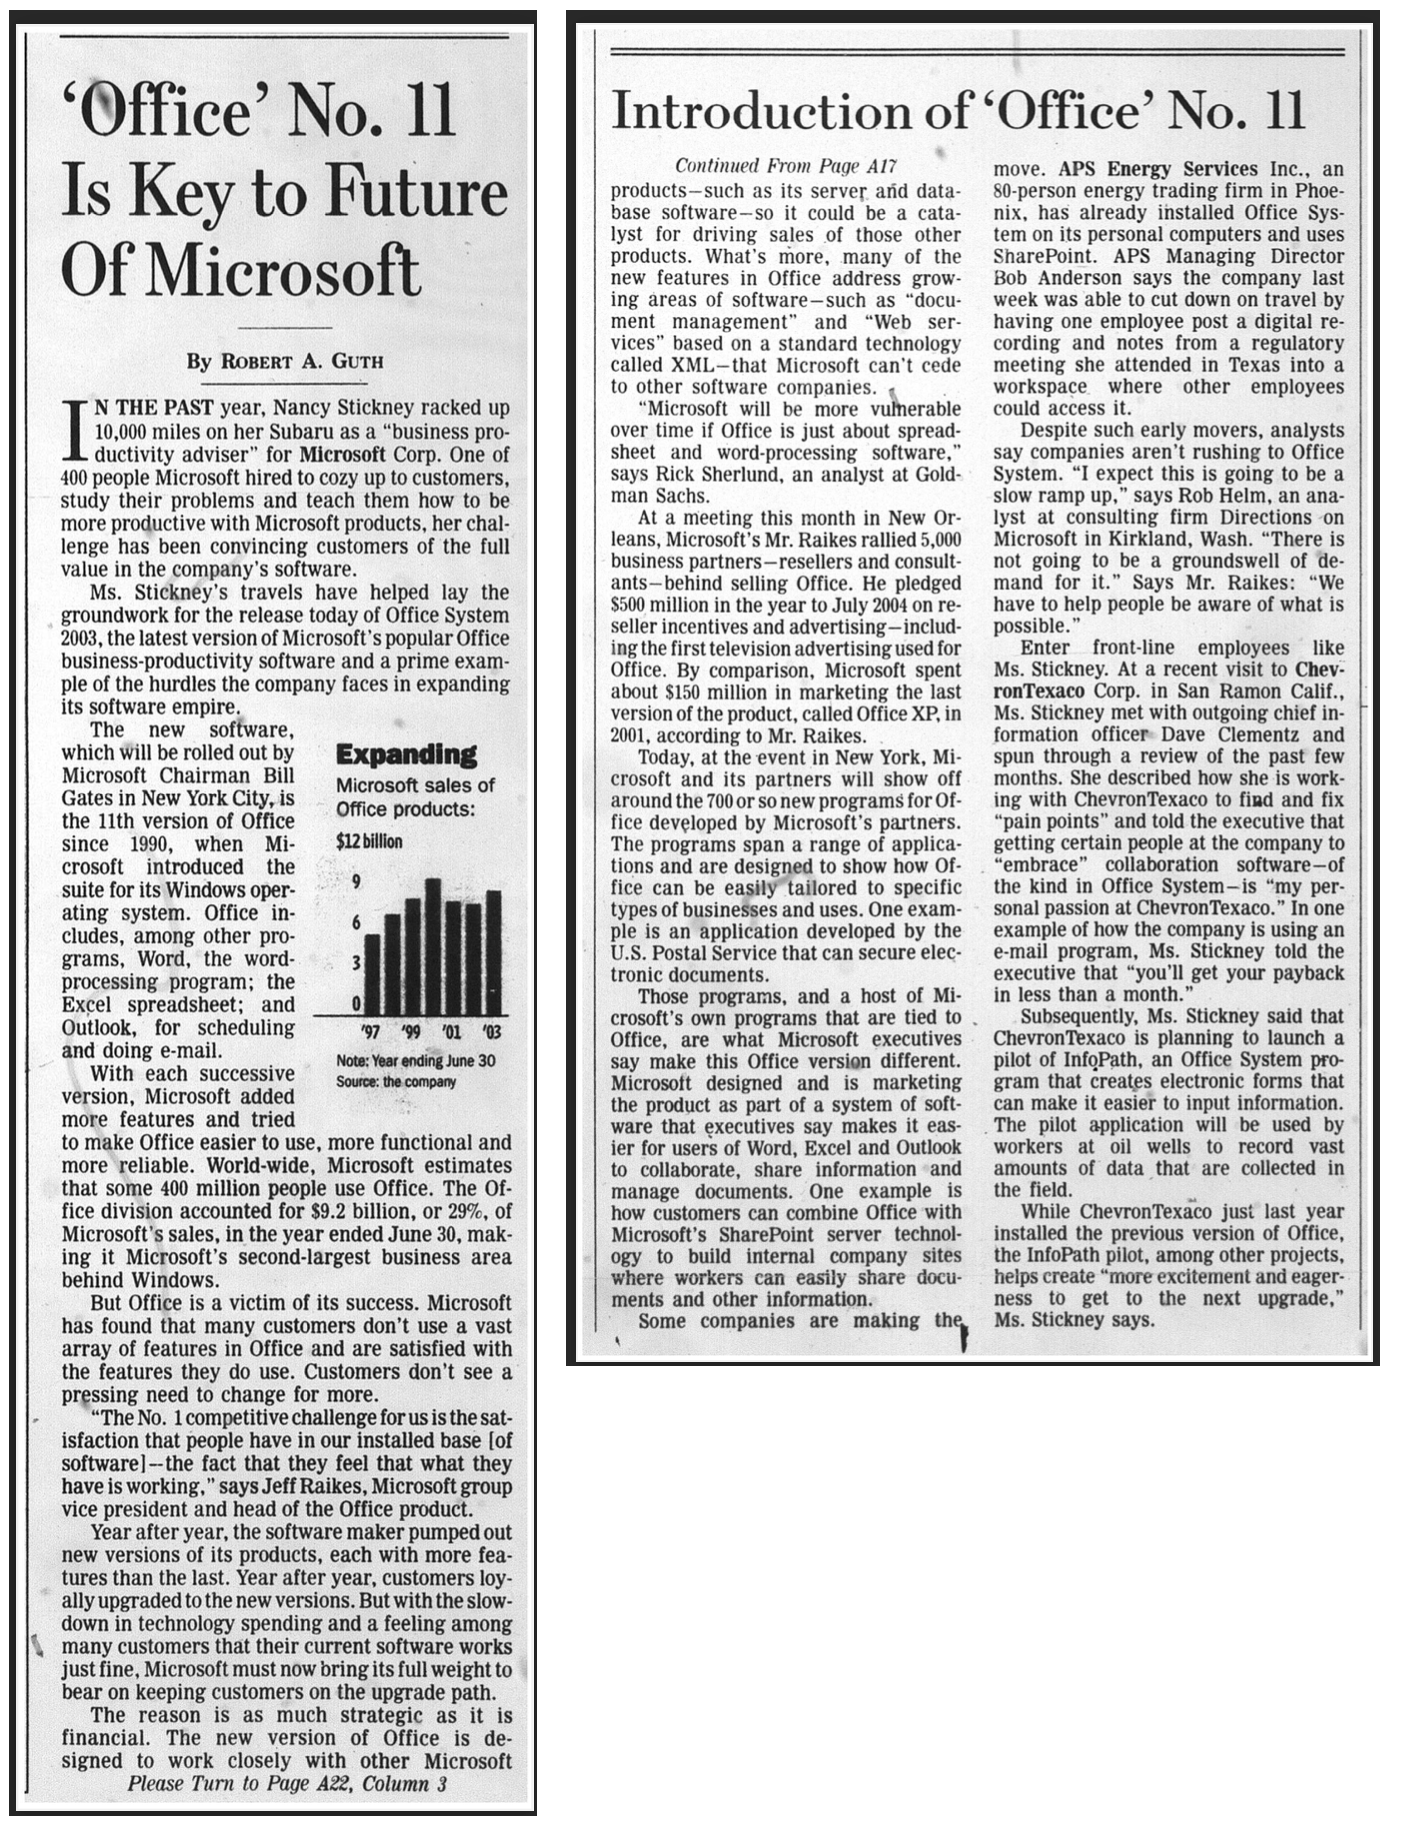 'Office' No. 11 Is Key to Future Of Microsoft By ROBERT A. GUTH - N THE PAST year, Nancy Stickney racked up _ ductivity adviser" for Microsoft Corp. One of 400 people Microsoft hired to cozy up to customers, study their problems and teach them how to be more productive with Microsoft products, her chal- lenge has been convincing customers of the full value in the company's software. Ms. Stickney's travels have helped lay the groundwork for the release today of Office System 2003, the latest version of Microsoft's popular Office business-productivity software and a prime exam- ple of the hurdles the company faces in expanding its software empire. The new software, which will be rolled out by Microsoft Chairman Bill Gates in New York City, is the 11th version of Office since 1990, when Mi- Expanding Microsoft sales of Office products: $12 billion crosoft introduced the suite for its Windows oper- ating system. Office in- cludes, among other pro- grams, Word, the word. processing program; the Excel spreadsheet: and Outlook, for scheduling and doing e-mail. With each successive '01 Note: Year ending June 30 Source: the company 193 version. Microsoft added more features and tried to make Office easier to use, more functional and more reliable. World-wide, Microsoft estimates that some 400 million people use Office. The Of- fice division accounted for $9.2 billion, or 29%, of Microsoft's sales, in the year ended June 30, mak- ing it Microsoft's second-largest business area behind Windows. But Office is a victim of its success. Microsoft has found that many customers don't use a vast array of features in Office and are satisfied with the features they do use. Customers don't see a pressing need to change for more. "The No. 1 competitive challenge for us is the sat- isfaction that people have in our installed base [of software]-the fact that they feel that what they have is working," says Jeff Raikes, Microsoft group vice president and head of the Office product. Year after year, the software maker pumped out new versions of its products, each with more fea- tures than the last. Year after year, customers loy- ally upgraded to the new versions. But with the slow- down in technology spending and a feeling among man customers that their current software works just fine, Microsoft must now bring its full weight to bear on keeping customers on the upgrade path. The reason is as much strategic as it is financial. The new version of Office is de- signed to work closely with other Microsoft products-such as its server and data- 80-person energy trading firm in Phoe- base software-so it could be a cata- nix, has already installed Office Sys- lyst for driving sales of those other tem on its personal computers and uses products. What's more, many of the SharePoint. APS Managing Director new features in Office address grow- Bob Anderson says the company last ing areas of software-such as "docu week was able to cut down on travel by ment management" and "Web ser- having one employee post a digital re- vices" based on a standard technology cording and notes from a regulatory called XML-that Microsoft can't cede meeting she attended in Texas into a to other software companies. workspace where other employees "Microsoft' will be more vulnerable could access it. over time if Office is just about spread- Despite such early movers, analysts sheet and word-processing software, say companies aren't rushing to Office says Rick Sherlund, an analyst at Gold- System. "I expect this is going to be a man Sachs. slow ramp up." says Rob Helm, an ana- At a meeting this month in New Or- lyst at consulting firm Directions on leans. Microsoft's Mr. Raikes rallied 5.000 Microsoft in Kirkland, Wash. "There is business partners -resellers and consult- not going to be a groundswell of de- ants-behind selling Office. He pledged mand for it." Says Mr. Raikes: "We $500 million in the year to July 2004 on re- have to help people be aware of what is seller incentives and advertising-includ- possible. ing the first television advertising used for Enter frontline employees like Office. By comparison, Microsoft spent Ms. Stickney. At a recent visit to Chev- about $150 million in marketing the last ronTexaco Corp. in San Ramon Calif. version of the product, called Office XP, in Ms. Stickney met with outgoing chief in- 2001, according to Mr. Raikes. formation officer Dave Clementz and Today, at the event in New York, Mi- spun through a review of the past few crosoft and its partners will show off months. She described how she is work- around the 700 or so new programs for Of- ing with ChevronTexaco to find and fix fice developed by Microsoft's partners. "pain points" and told the executive that The programs span a range of applica- getting certain people at the company to tions and are designed to show how Of- "embrace" collaboration software-of fice can be easily tailored to specific the kind in Office System-is "my per- types of businesses and uses. One exam- sonal passion at ChevronTexaco." In one ple is an application developed by the example of how the company is using an U.S. Postal Service that can secure elec- e-mail program, Ms. Stickney told the tronic documents. Those programs, and a host of Mi- it ecut'vi that month" get your payback crosoft's own programs that are tied to Subsequently, Ms. Stickney said that Office, are what Microsoft executives ChevronTexaco is planning to launch a say make this Office version different. pilot of InfoPath, an Office System pro- Microsott designed and is marketing gram that creates electronic forms that the product as part of a system of soft- can make it easier to input information. ware that executives say makes it eas- The pilot application will be used by ier for users of Word. Excel and Outlook workers at oil wells to record vast to collaborate, share information and amounts of data that are collected in manage documents. One example is the field. how customers can combine Office with While ChevronTexaco just last year Microsoft's SharePoint server technol- installed the previous version of Office, ogy to build internal company sites the InfoPath pilot, among other projects, where workers can easily share docu- helps create "more excitement and eager- ments and other information. ness to get to the next upgrade," Some companies are making the Ms. Stickney says.